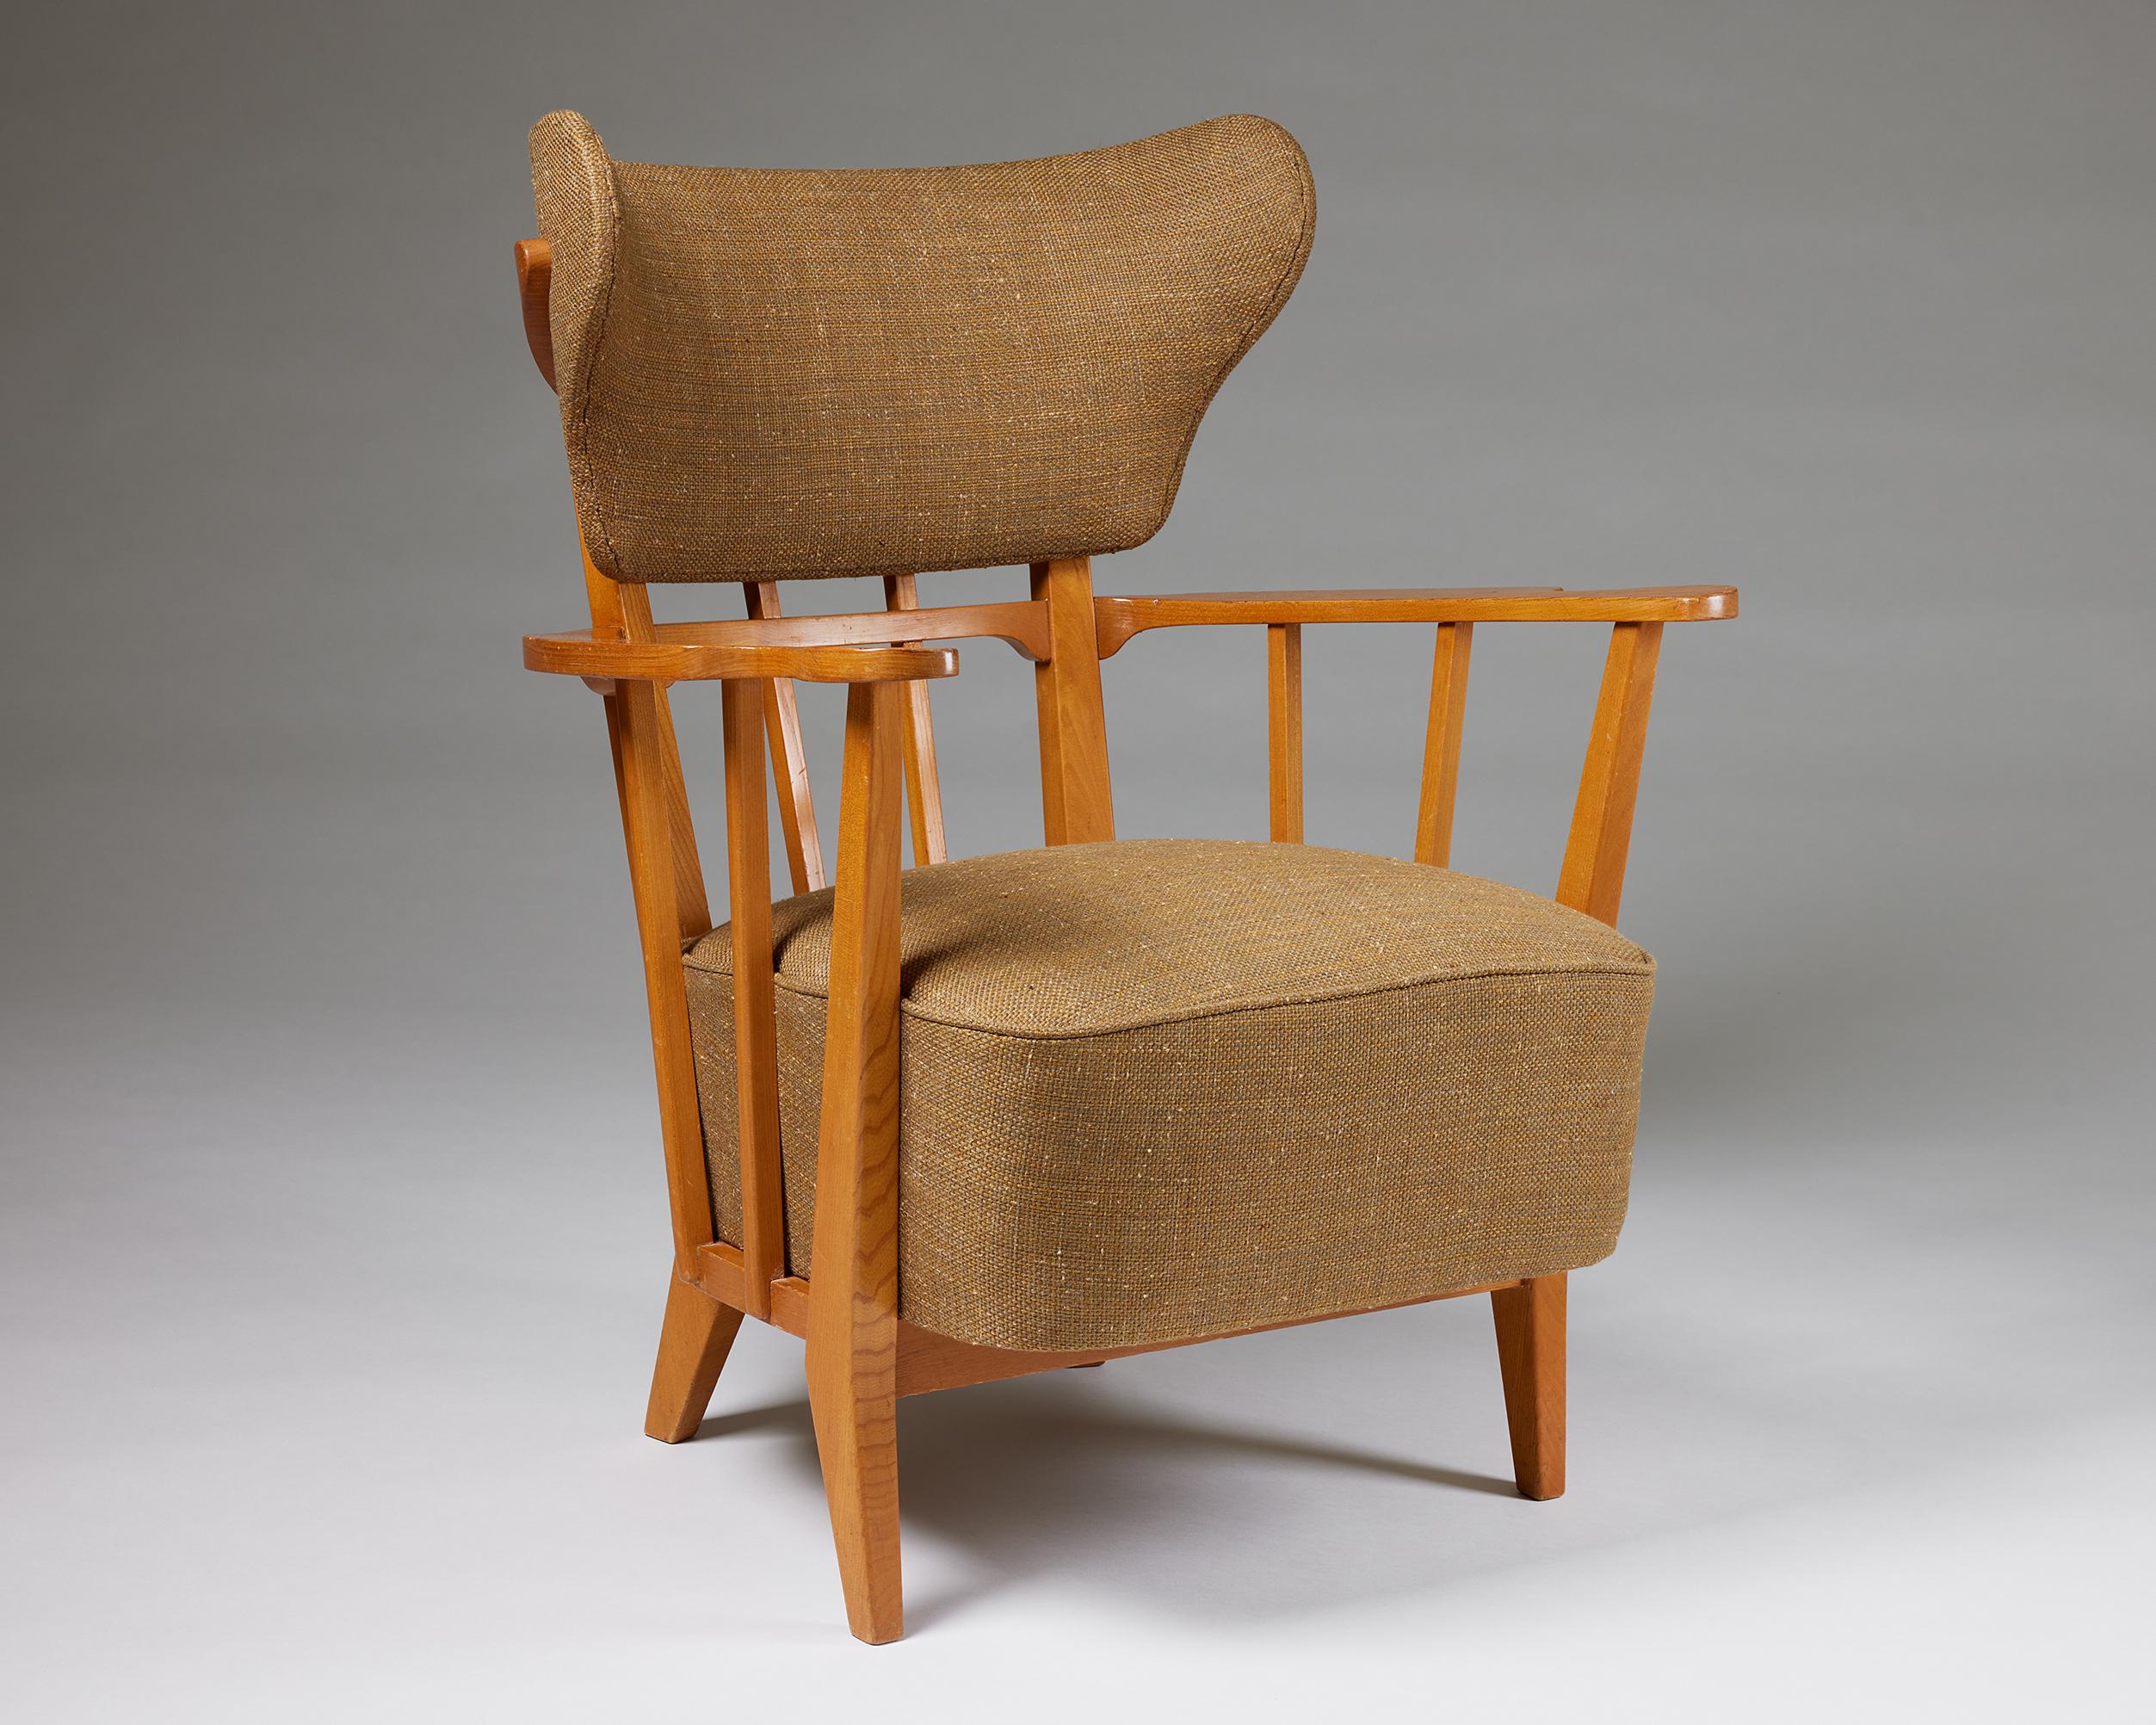 Easy chair designed by Alvar Andersson for Ferdinand Lundquist & Co,
Sweden, 1940s.

Textile and birch.

Marked.

H: 89 cm / 2' 11''
W: 71 cm / 2' 4''
D: 69 cm / 2' 3 1/4''
SH: 43 cm / 17''
AH: 62 cm / 2' 1/2''